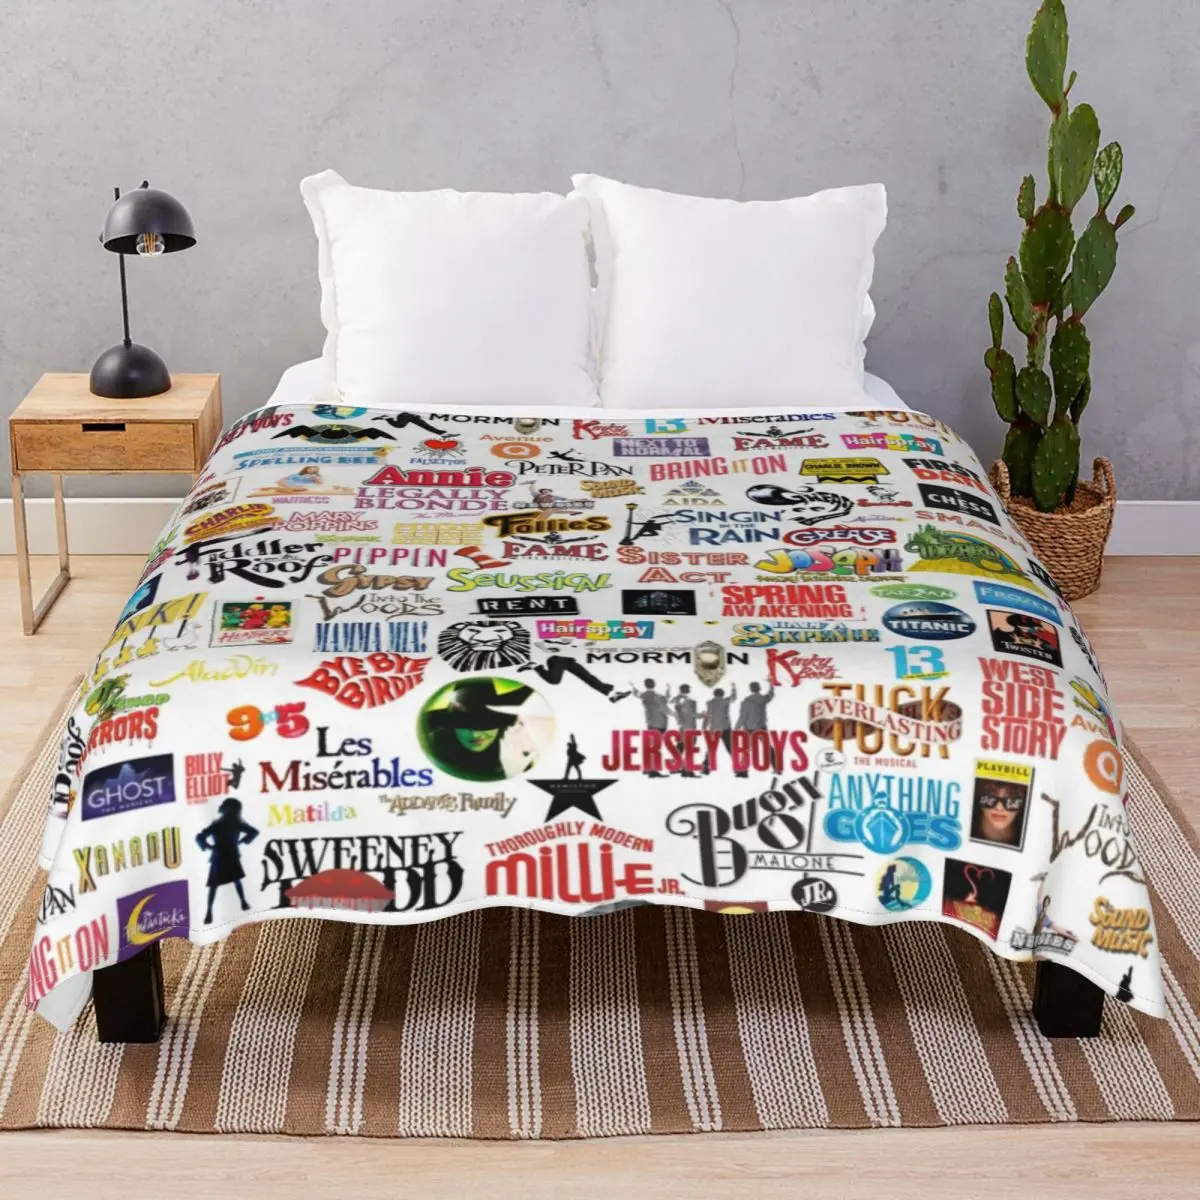 Musical Logos Blankets Fleece Textile Decor Multifunction Throw Blanket for Bedding Home Couch Travel Office